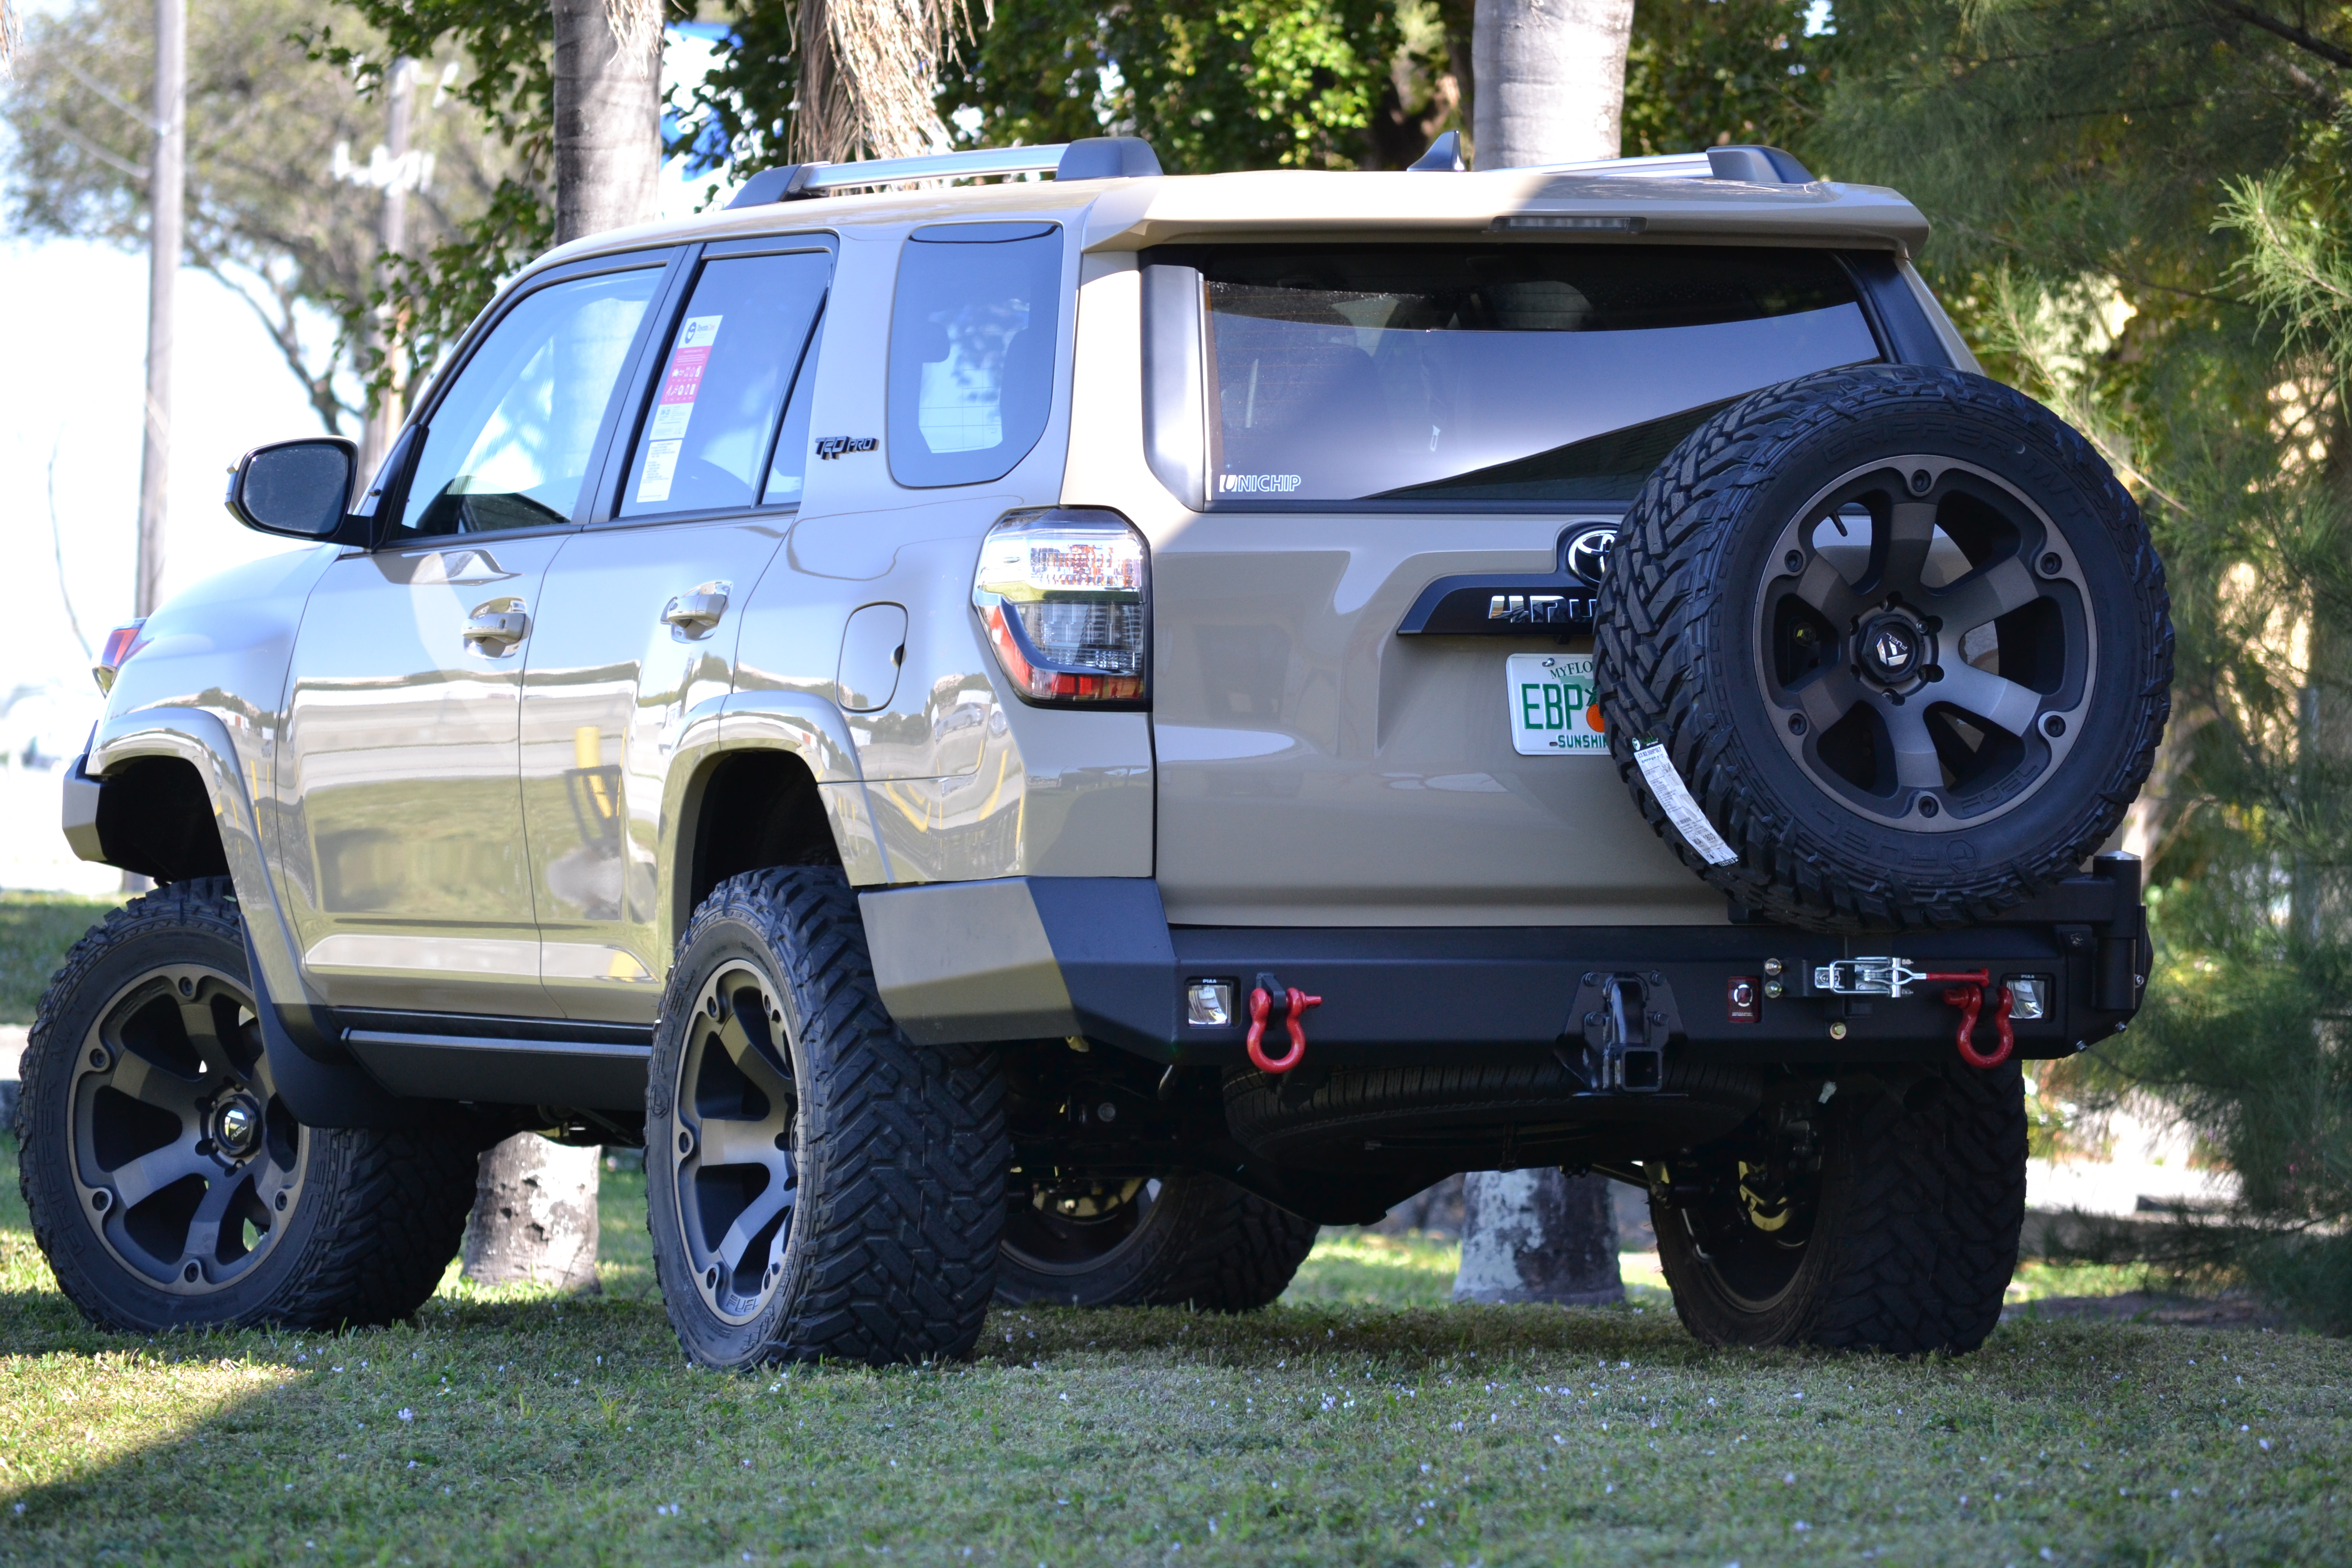 Toyota 4Runner 2010UP Rear Elite Bumper with tire Carrier.